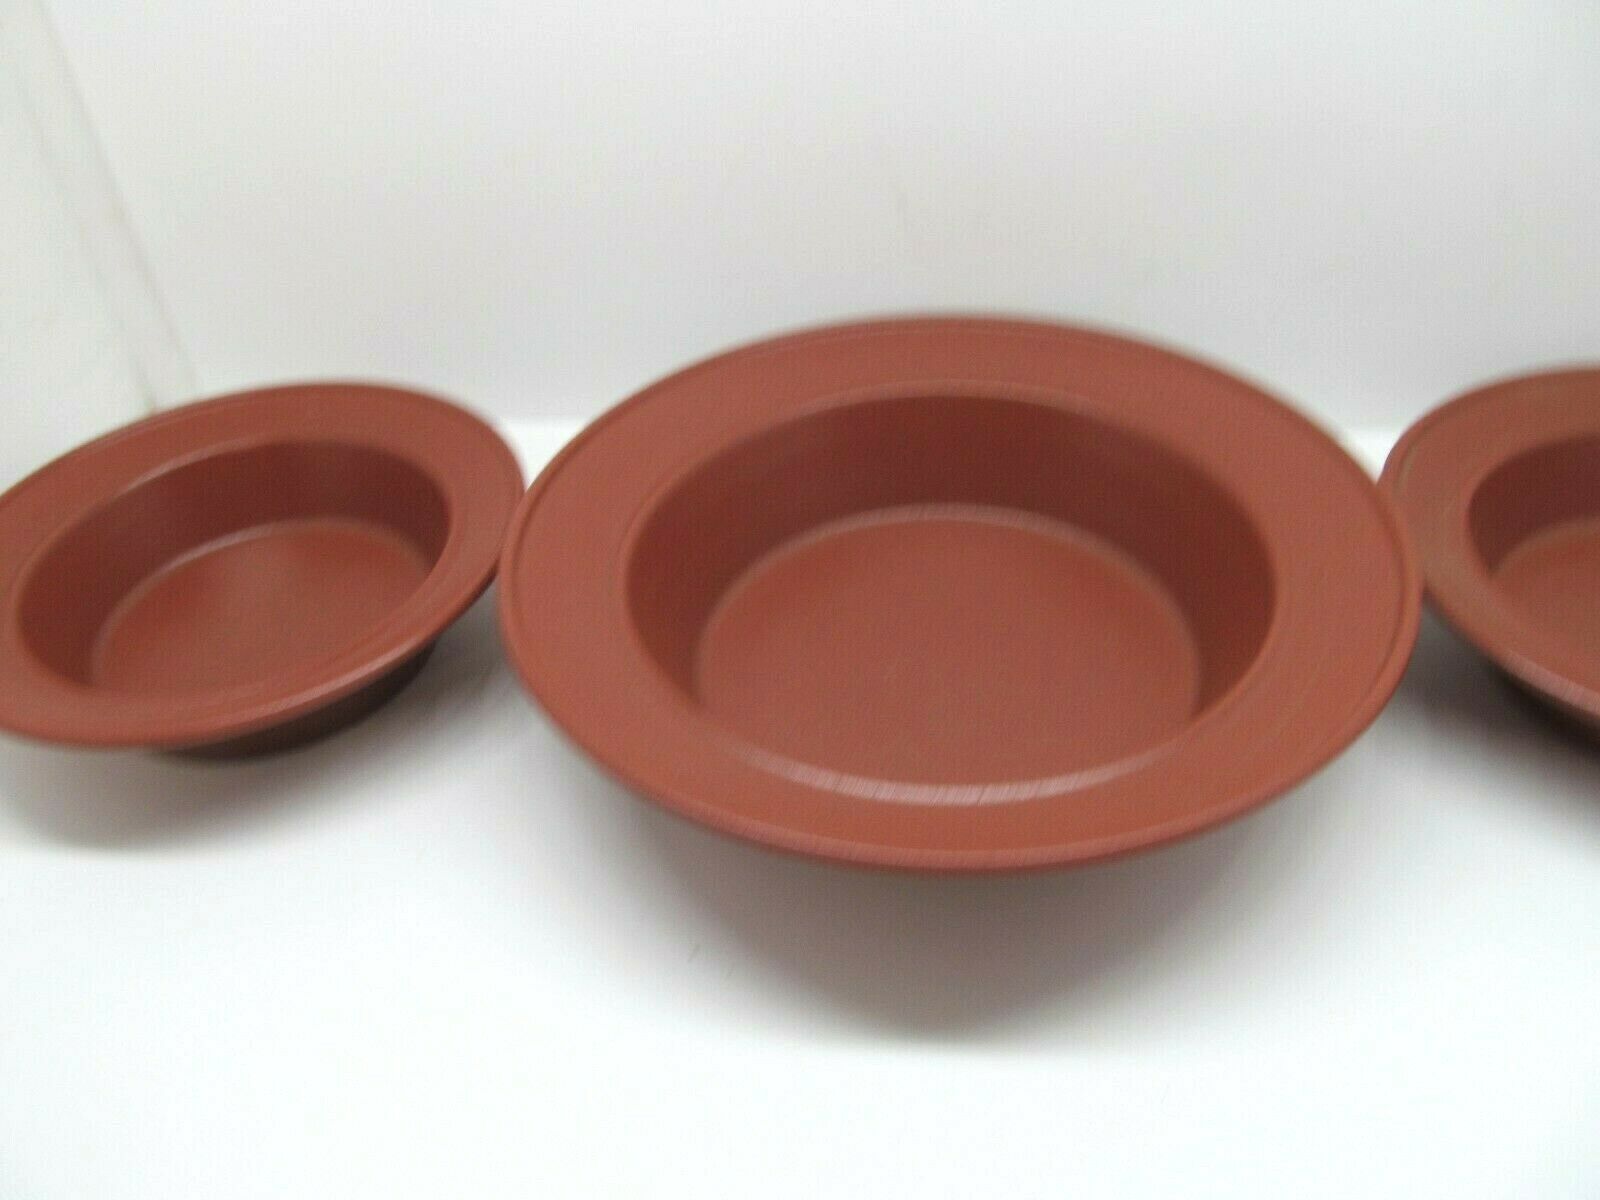 Primary image for Mikasa Ambience Brick 8 1/4" Rimmed Soup Bowls Set Of 2 And A 11" Vegetable Bowl